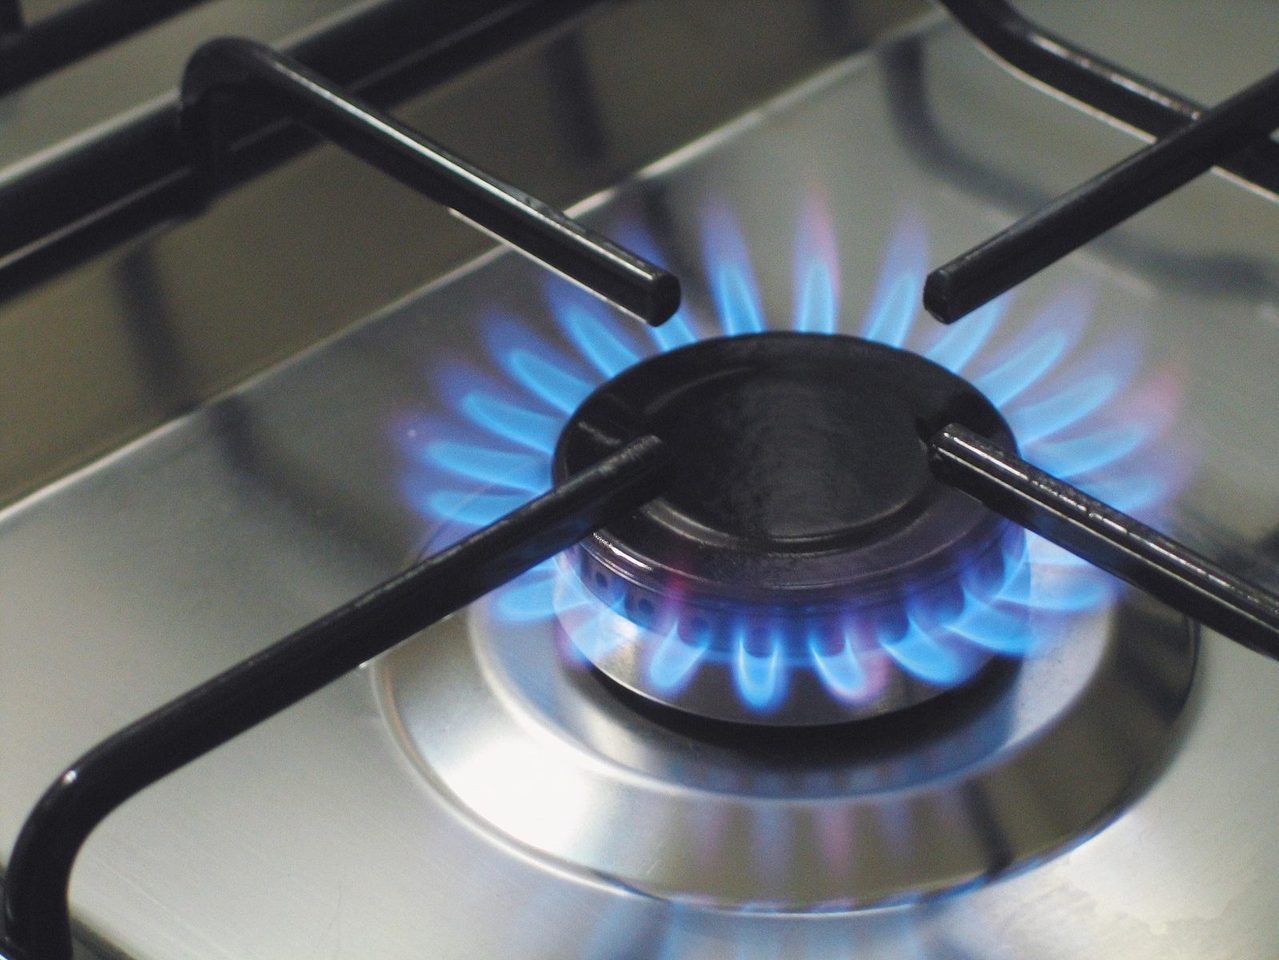 Blue flame on stovetop